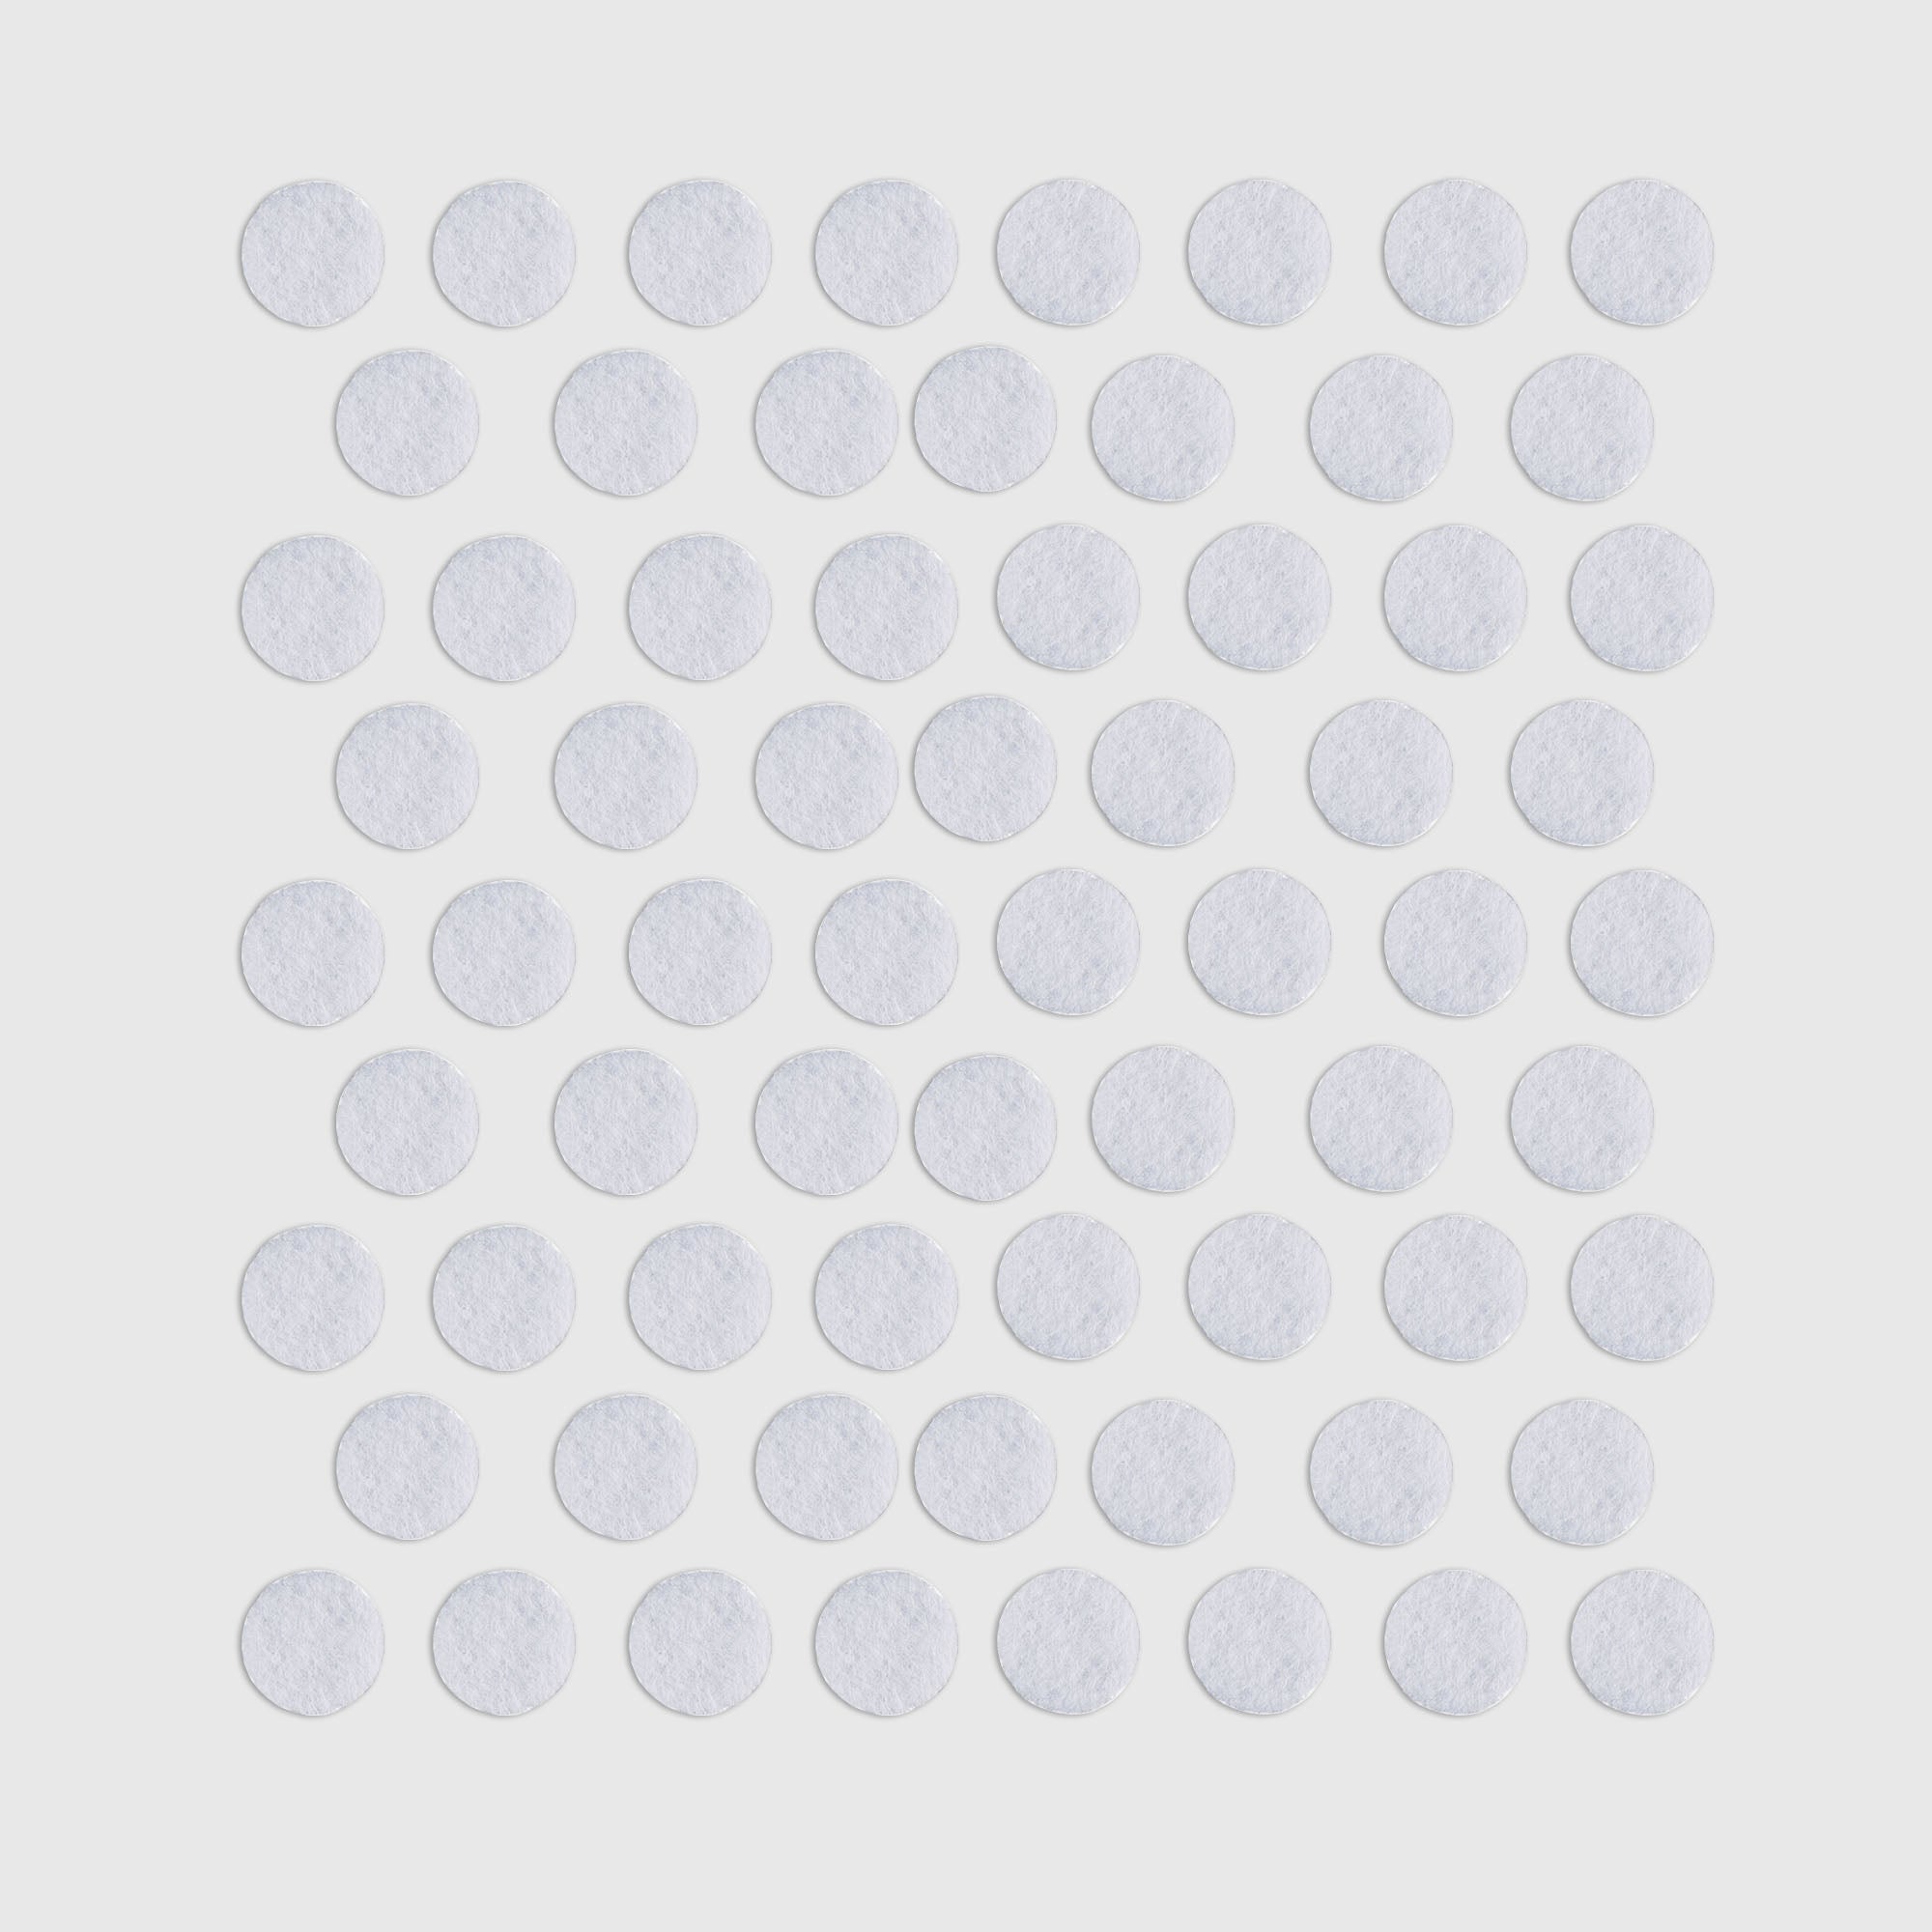 1,000pcs Microdermabrasion Replacement Filters | 10mm Cotton Rounds for Diamond Peel - Project E Beauty